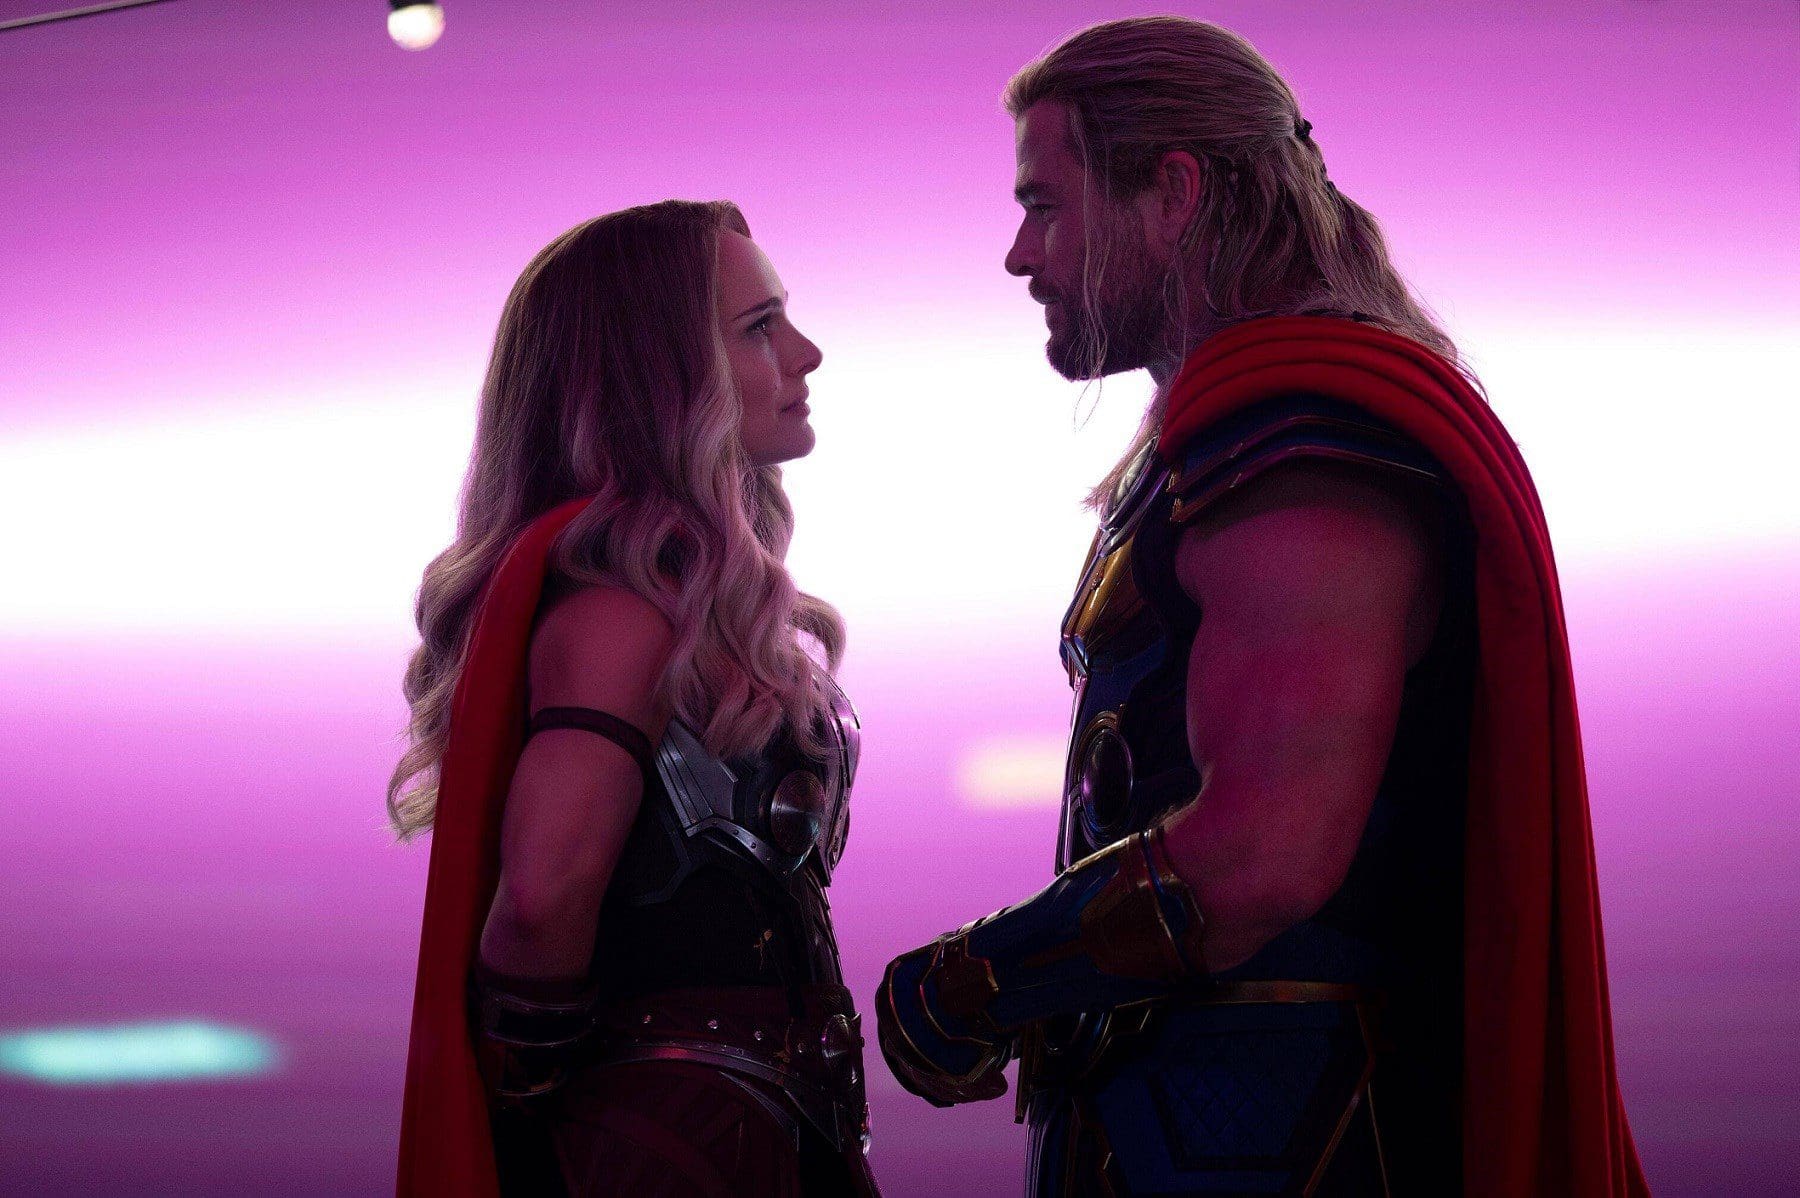 Natalie Portman and Chris Hemsworth in THOR: LOVE AND THUNDER.